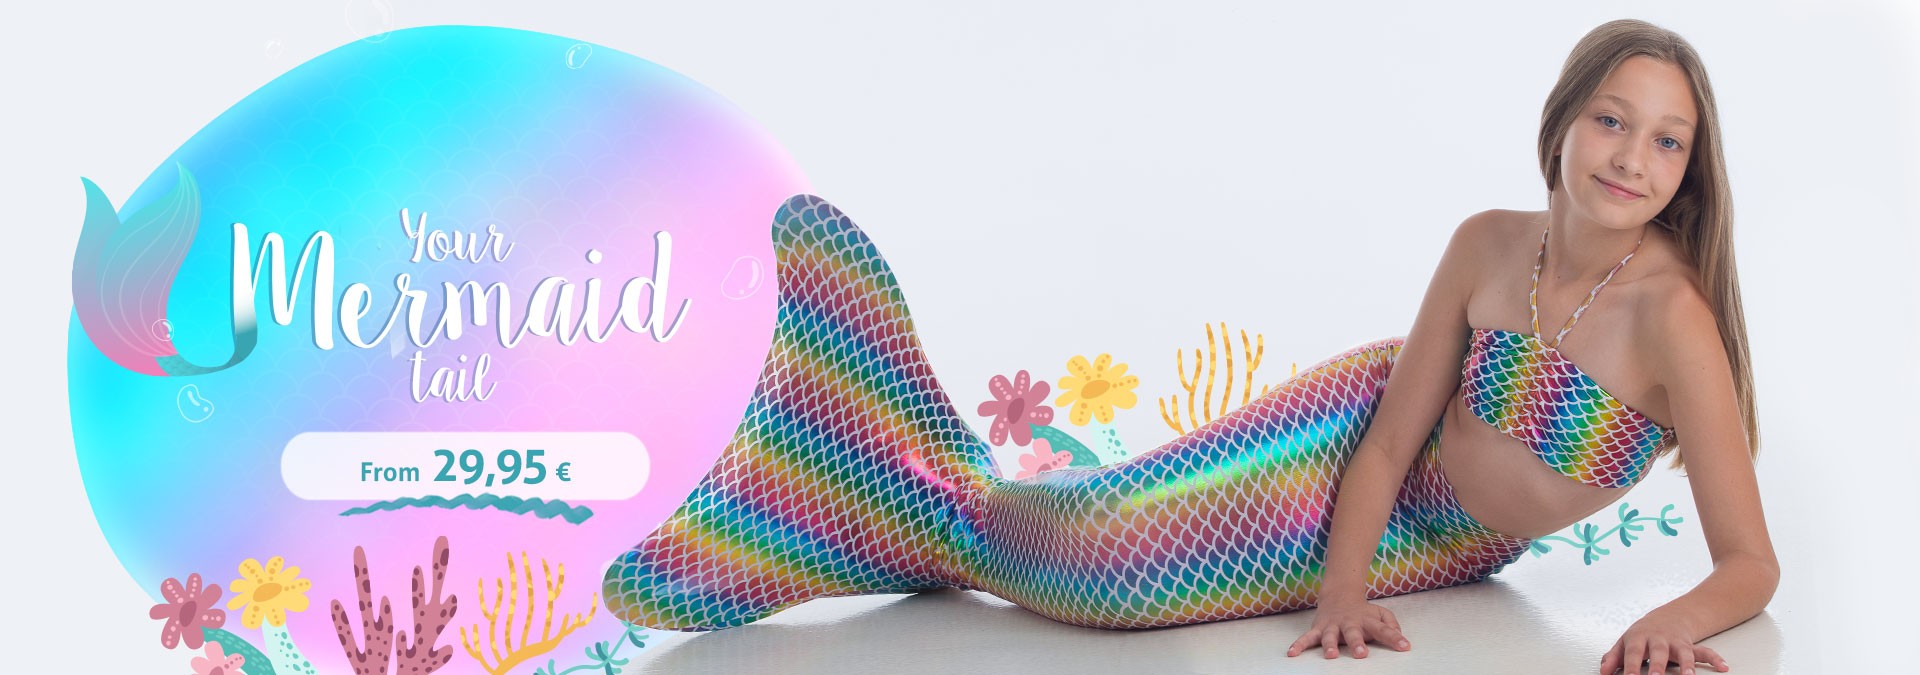 Your mermaid tail from 29,95